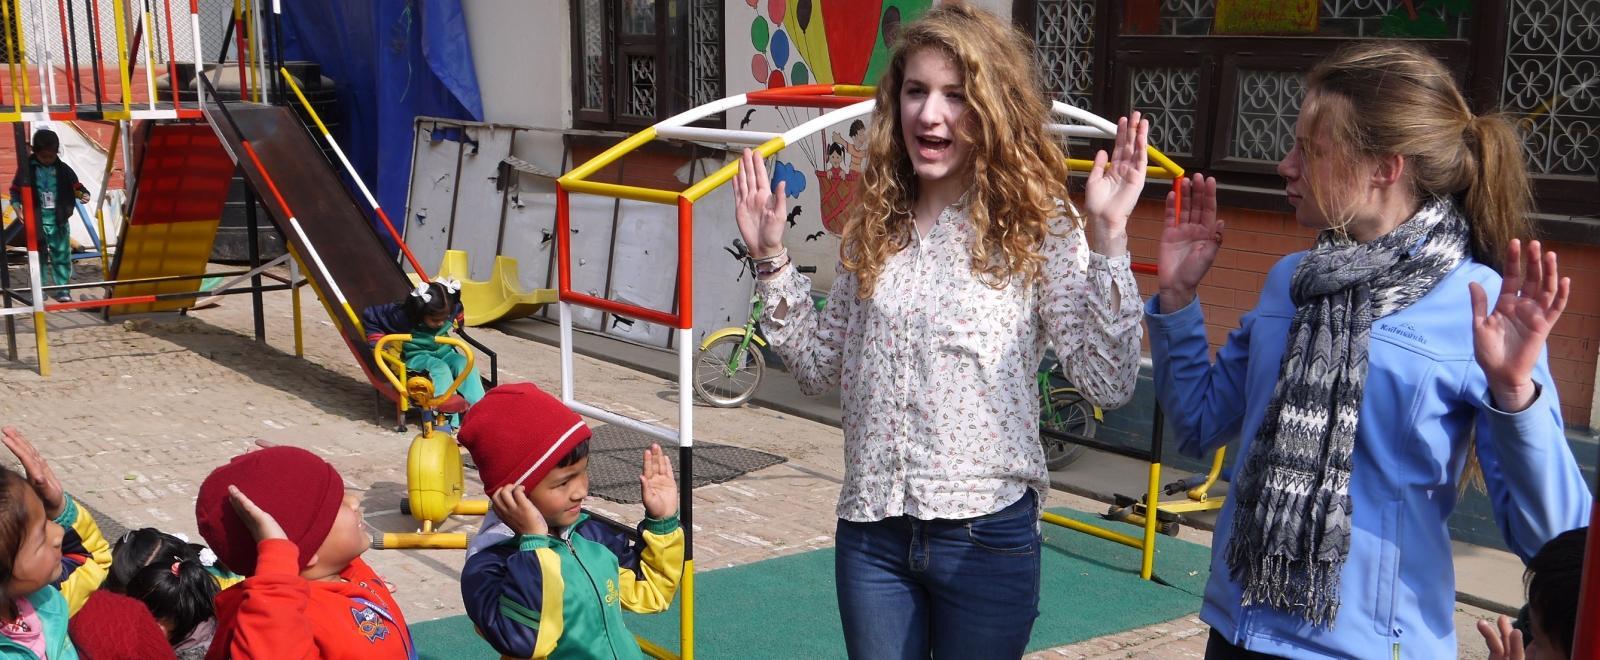 Teenage volunteers doing work with children in Nepal, do an activity with children on the playground.  